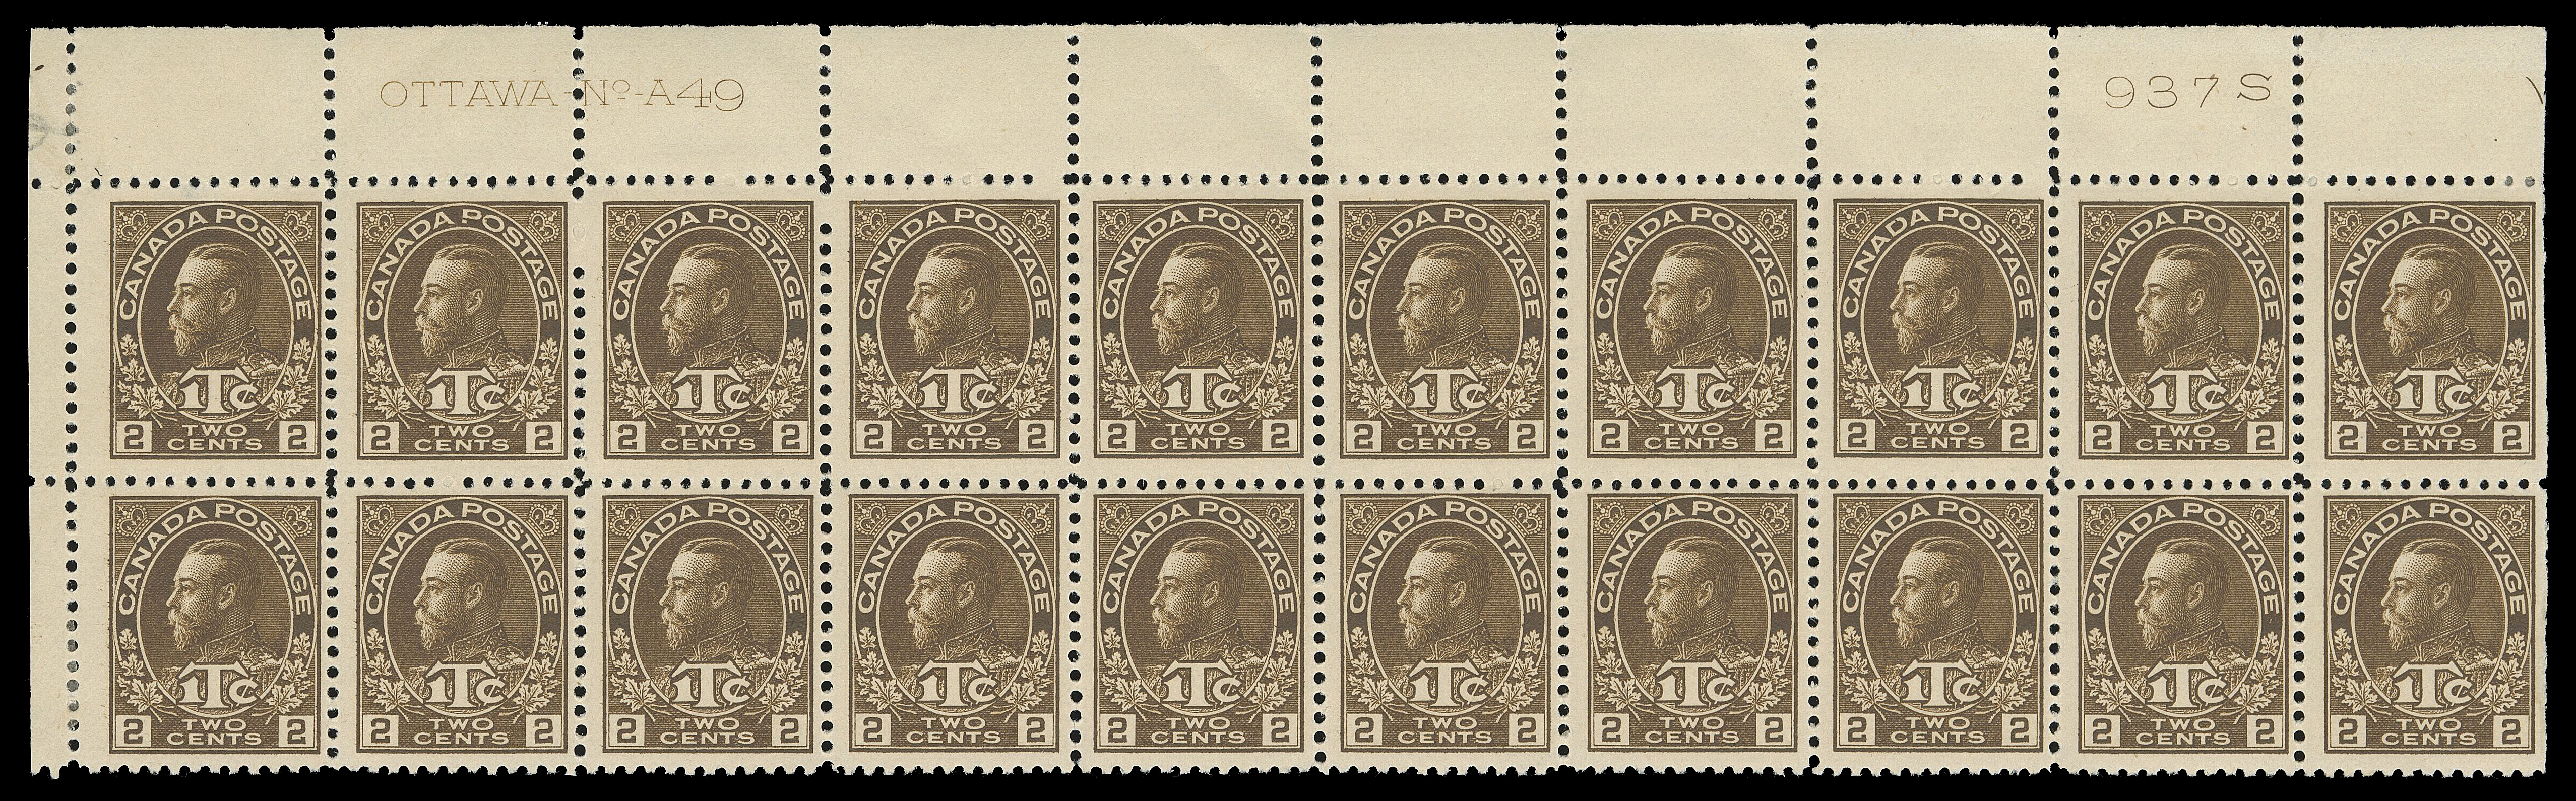 ADMIRAL STAMPS  MR4 shades,An attractive quartet of consecutive plate blocks of twenty in three distinctive shades of brown - UL Plate 49 in dark brown (small hinge thin on upper left stamp), UL Plate 50 in dark yellowish brown, UR Plates 51 & 52 in a rich brown shade; latter strip partly severed between first and second columns and hinge supported, well centered; all blocks hinged in end columns leaving fifteen or sixteen stamps NH, F-VF; an outstanding and very rare group, each being the only reported multiple of any size for their respective plate numbers per the Glen Lundeen census. (Unitrade cat. $5,660)